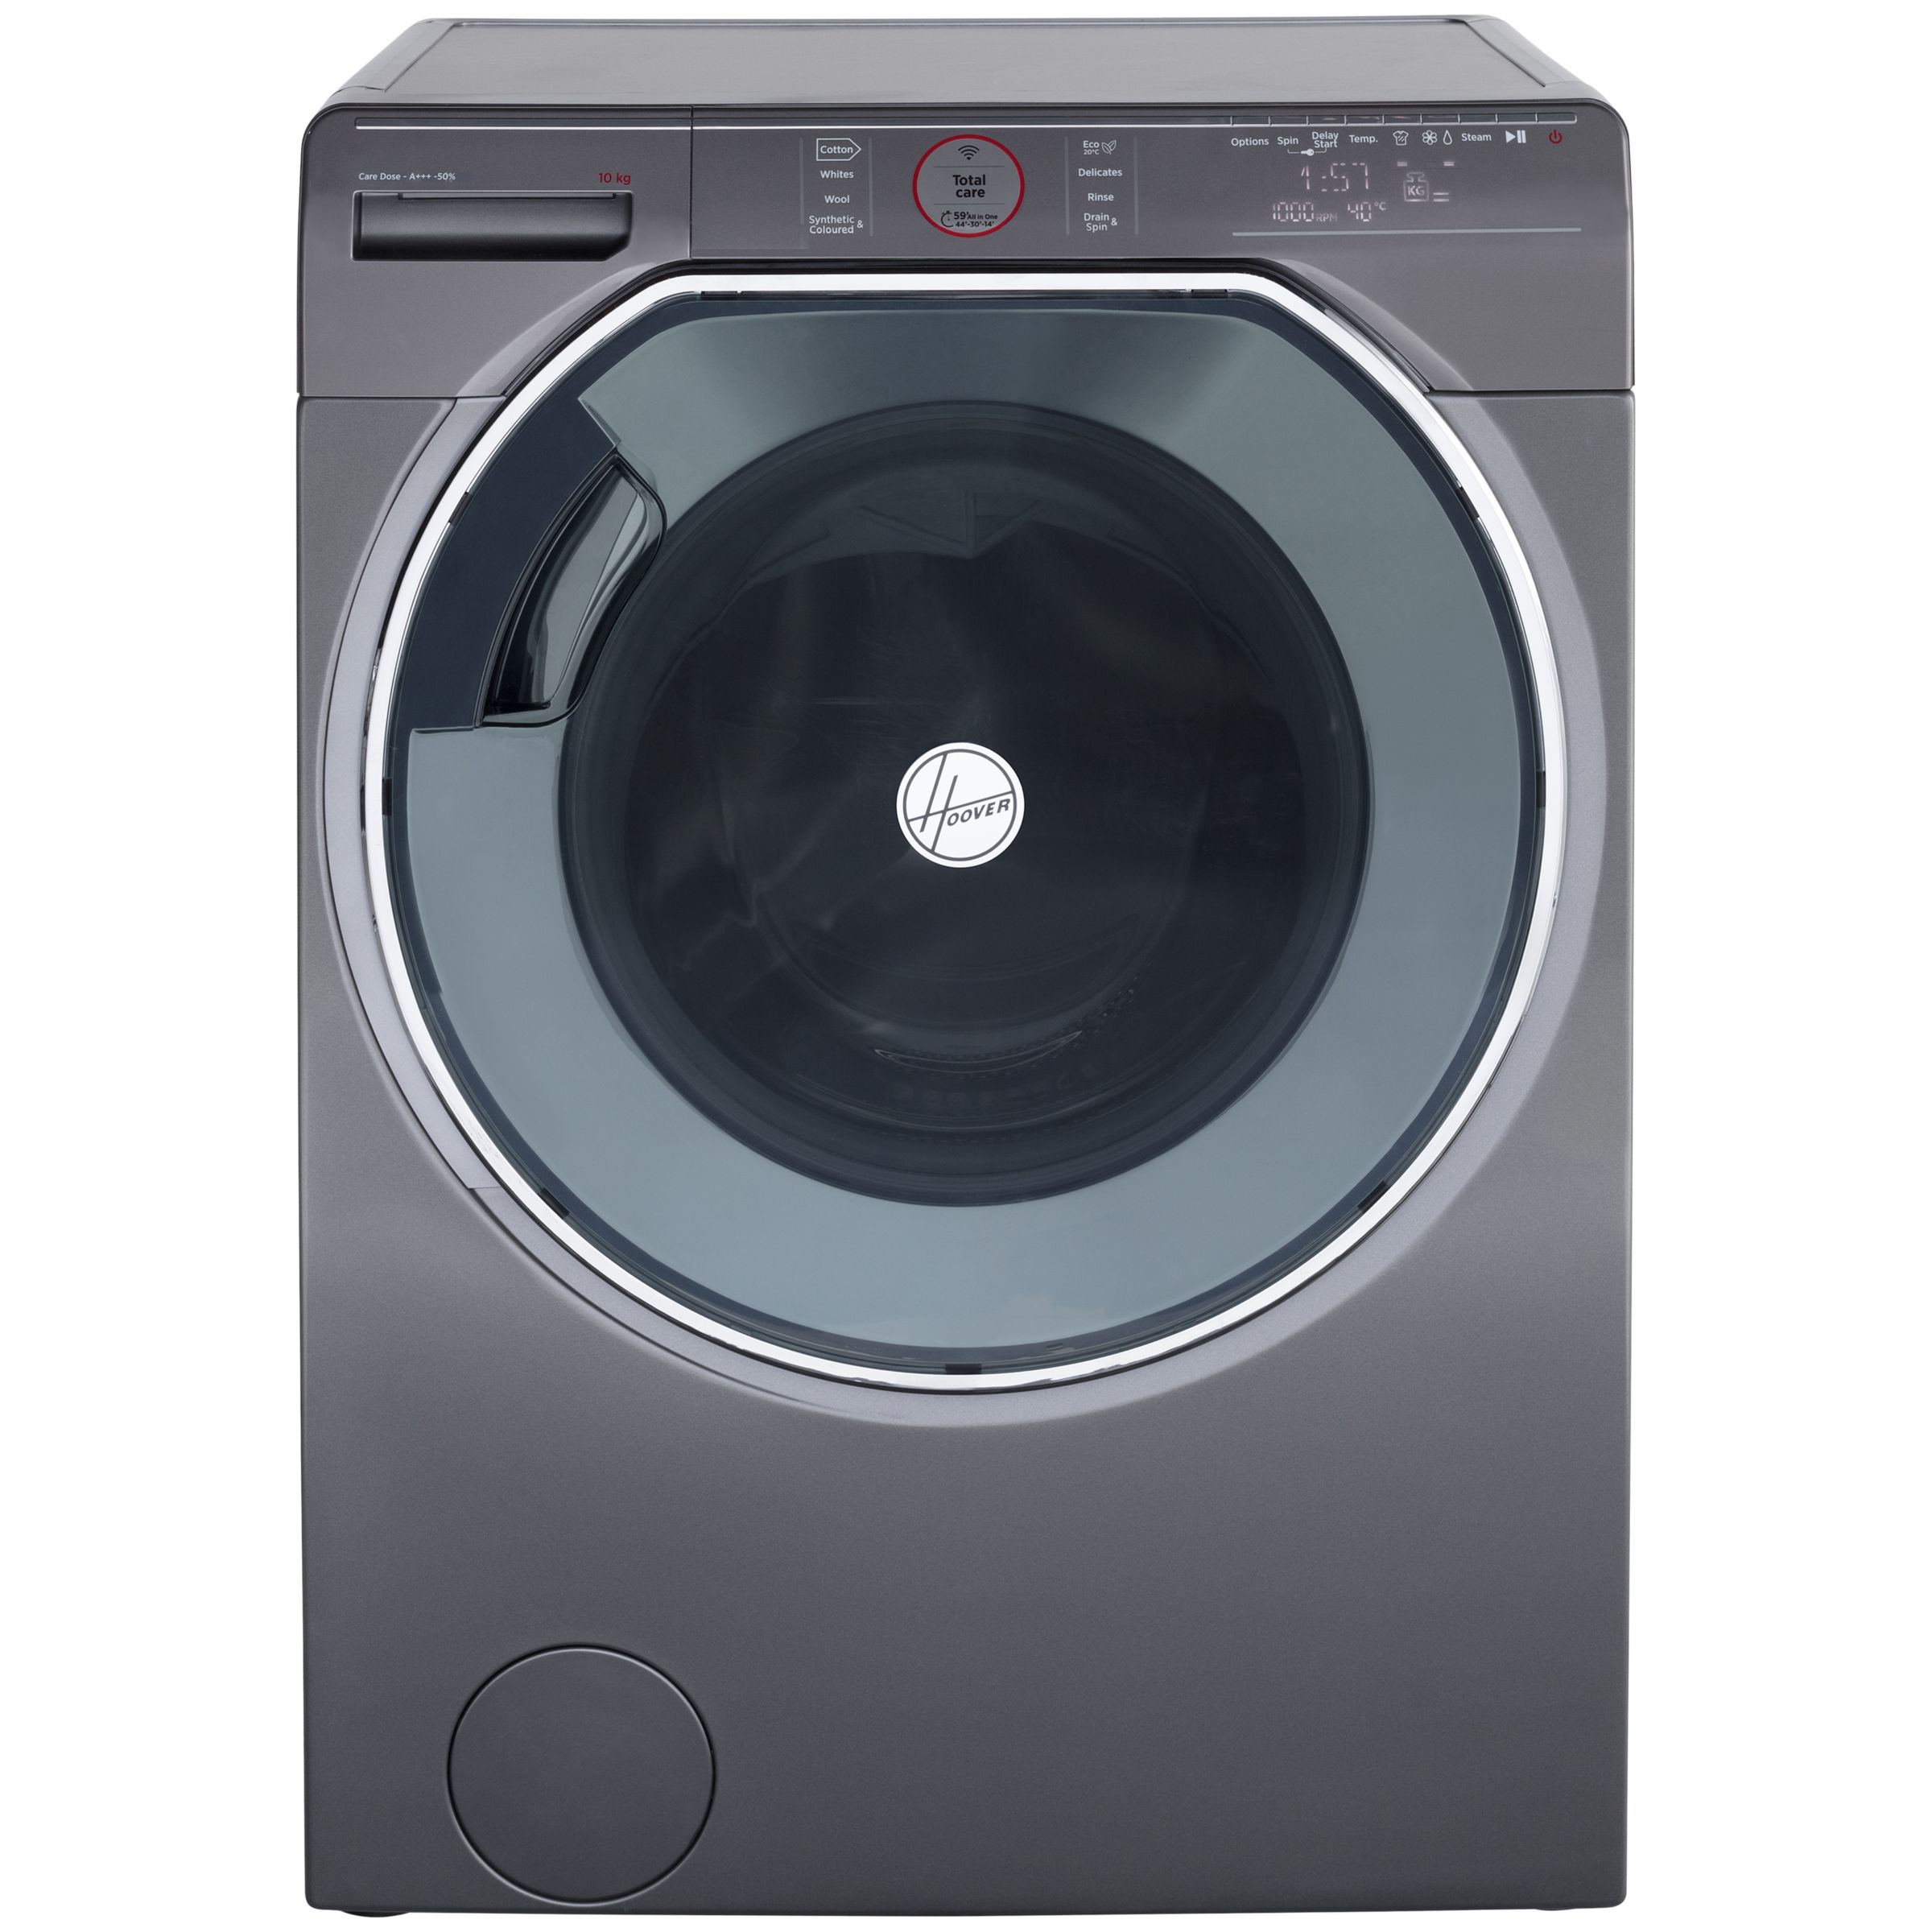 Hoover AXI AWMPD610LH8 Washing Machine, A+++ Energy Rating, 10kg, 1600rpm